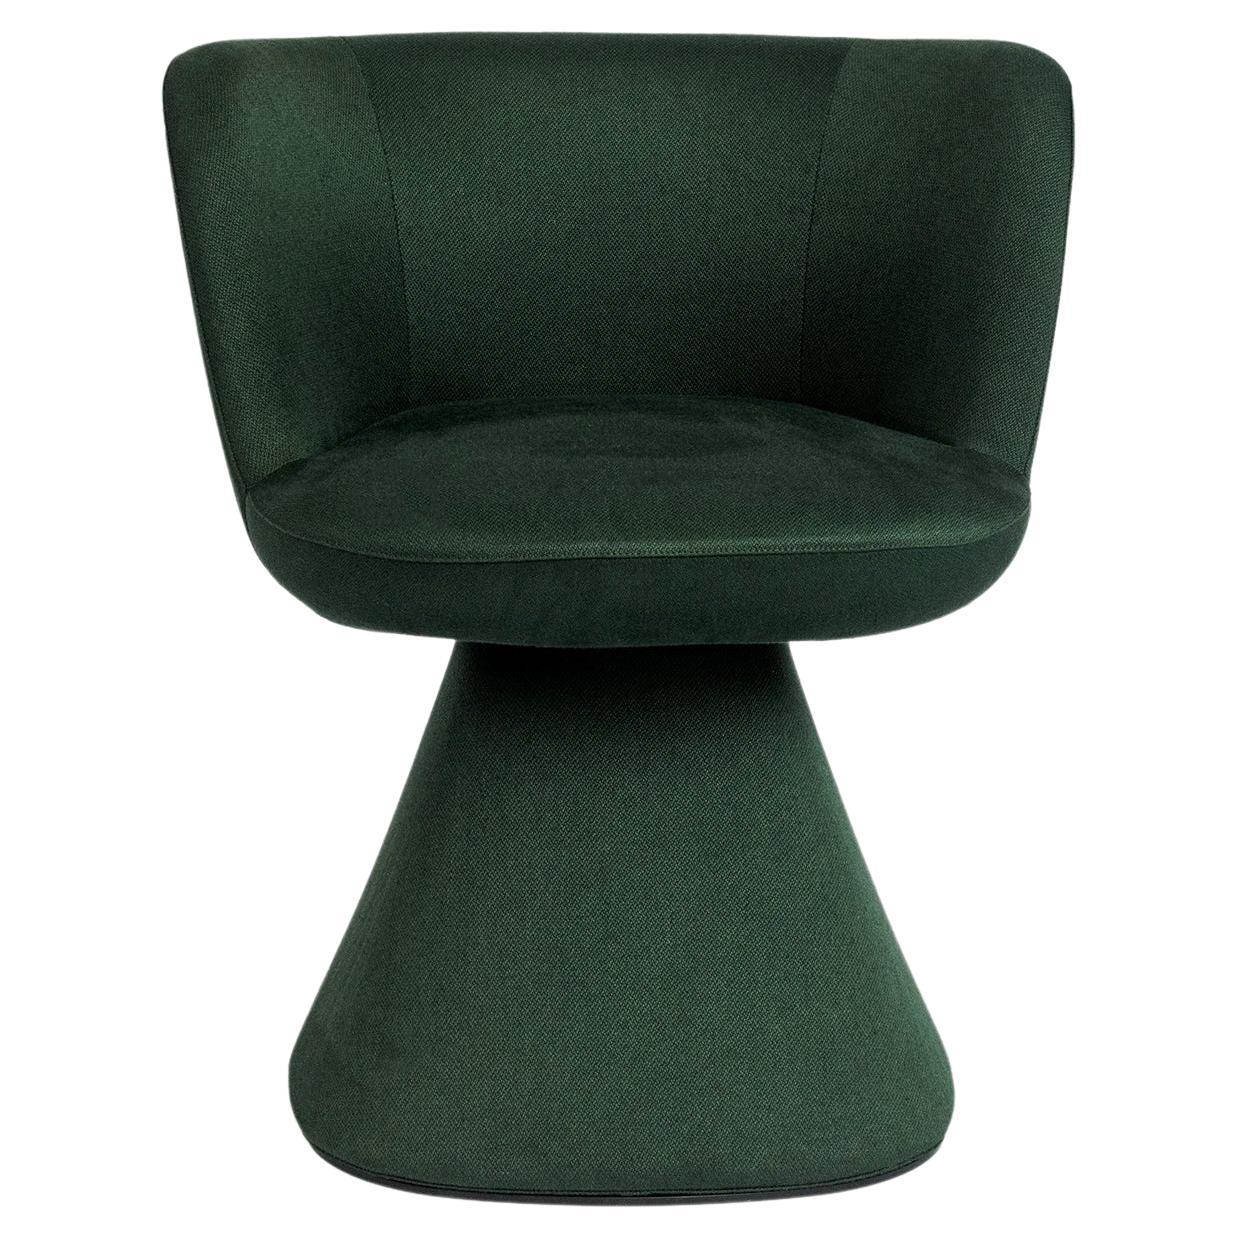 B&B Italia Flair O' Swivel Dining Chair in Forest Green Satin - Available Now